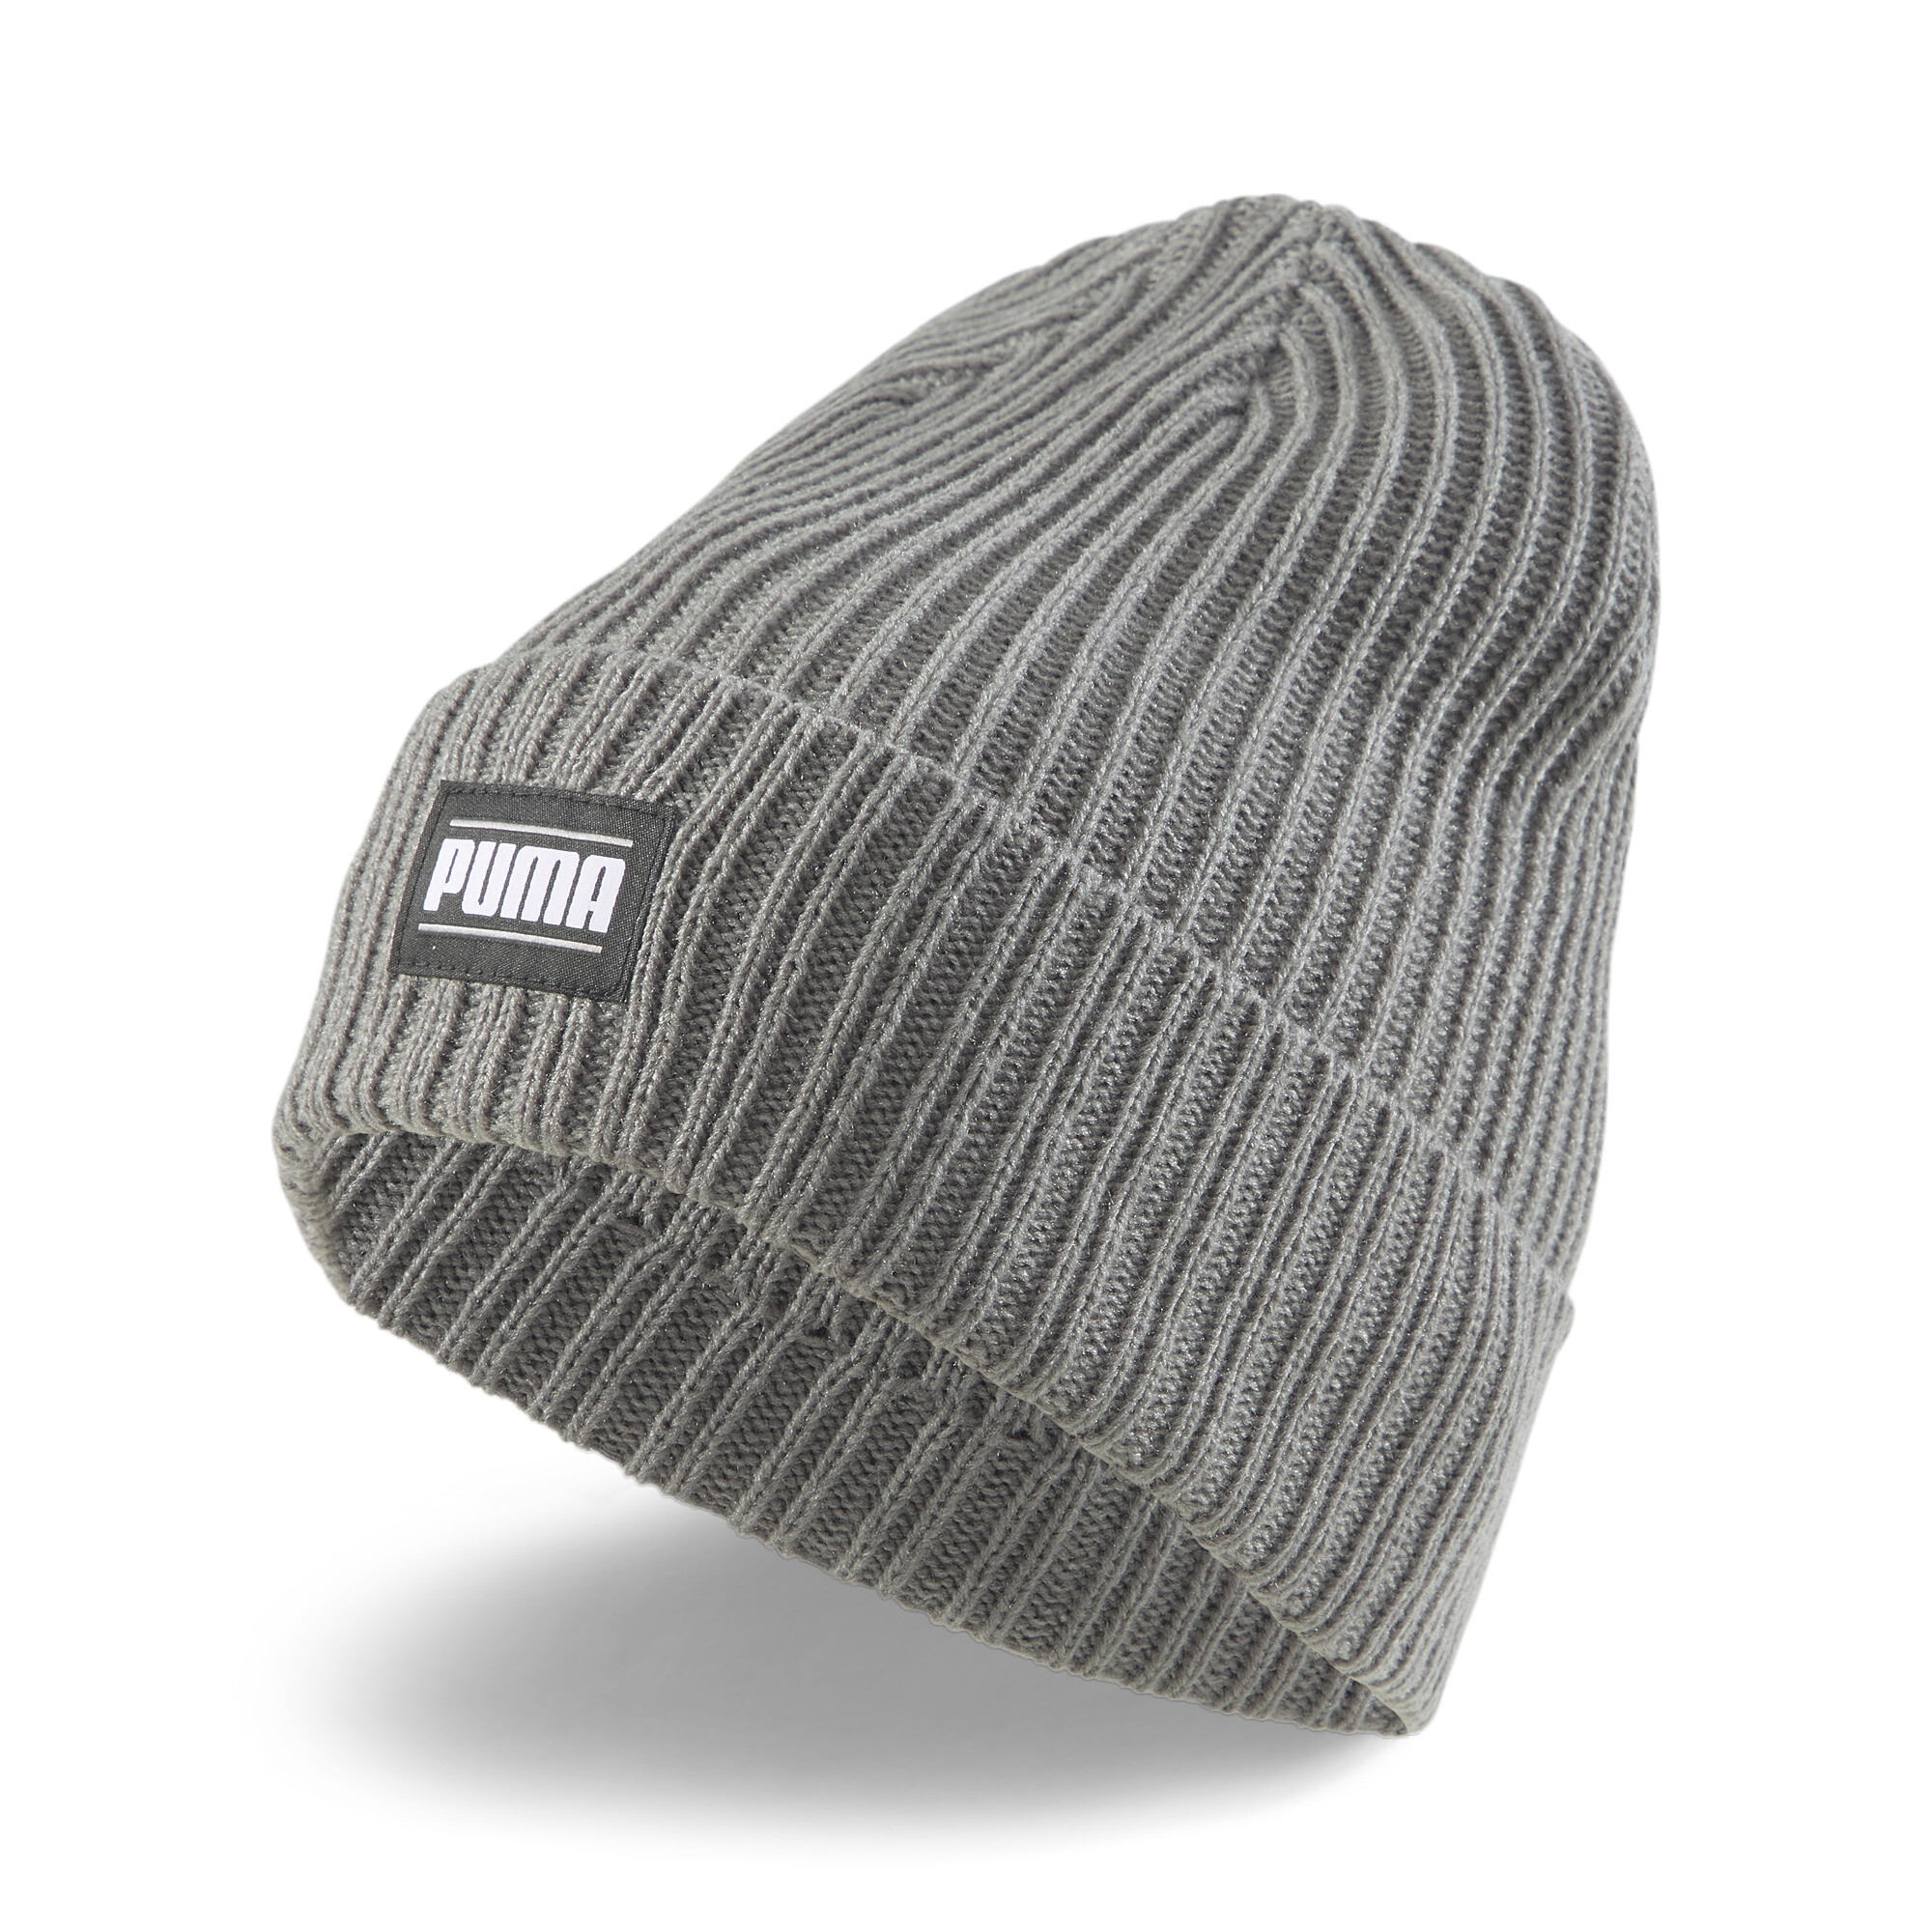 Puma Classic Cuff Ribbed Beanie Hat, Gray, Size Adult, Accessories